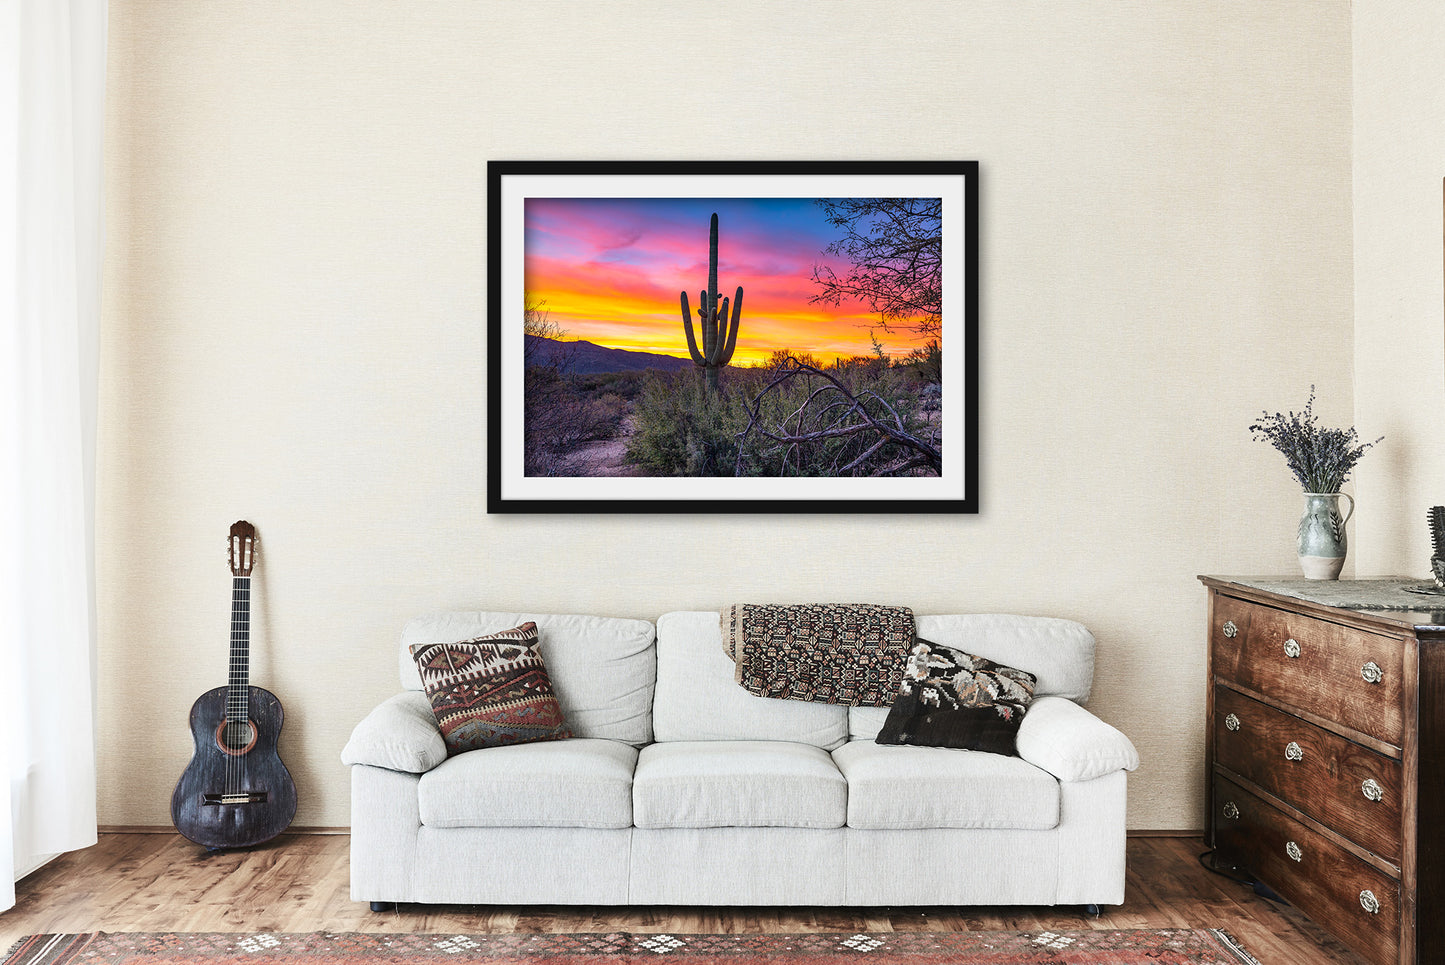 Saguaro Cactus Framed and Matted Print | Sonoran Desert Photo | Arizona Decor | Southwestern Photography | Western Wall Art | Ready to Hang